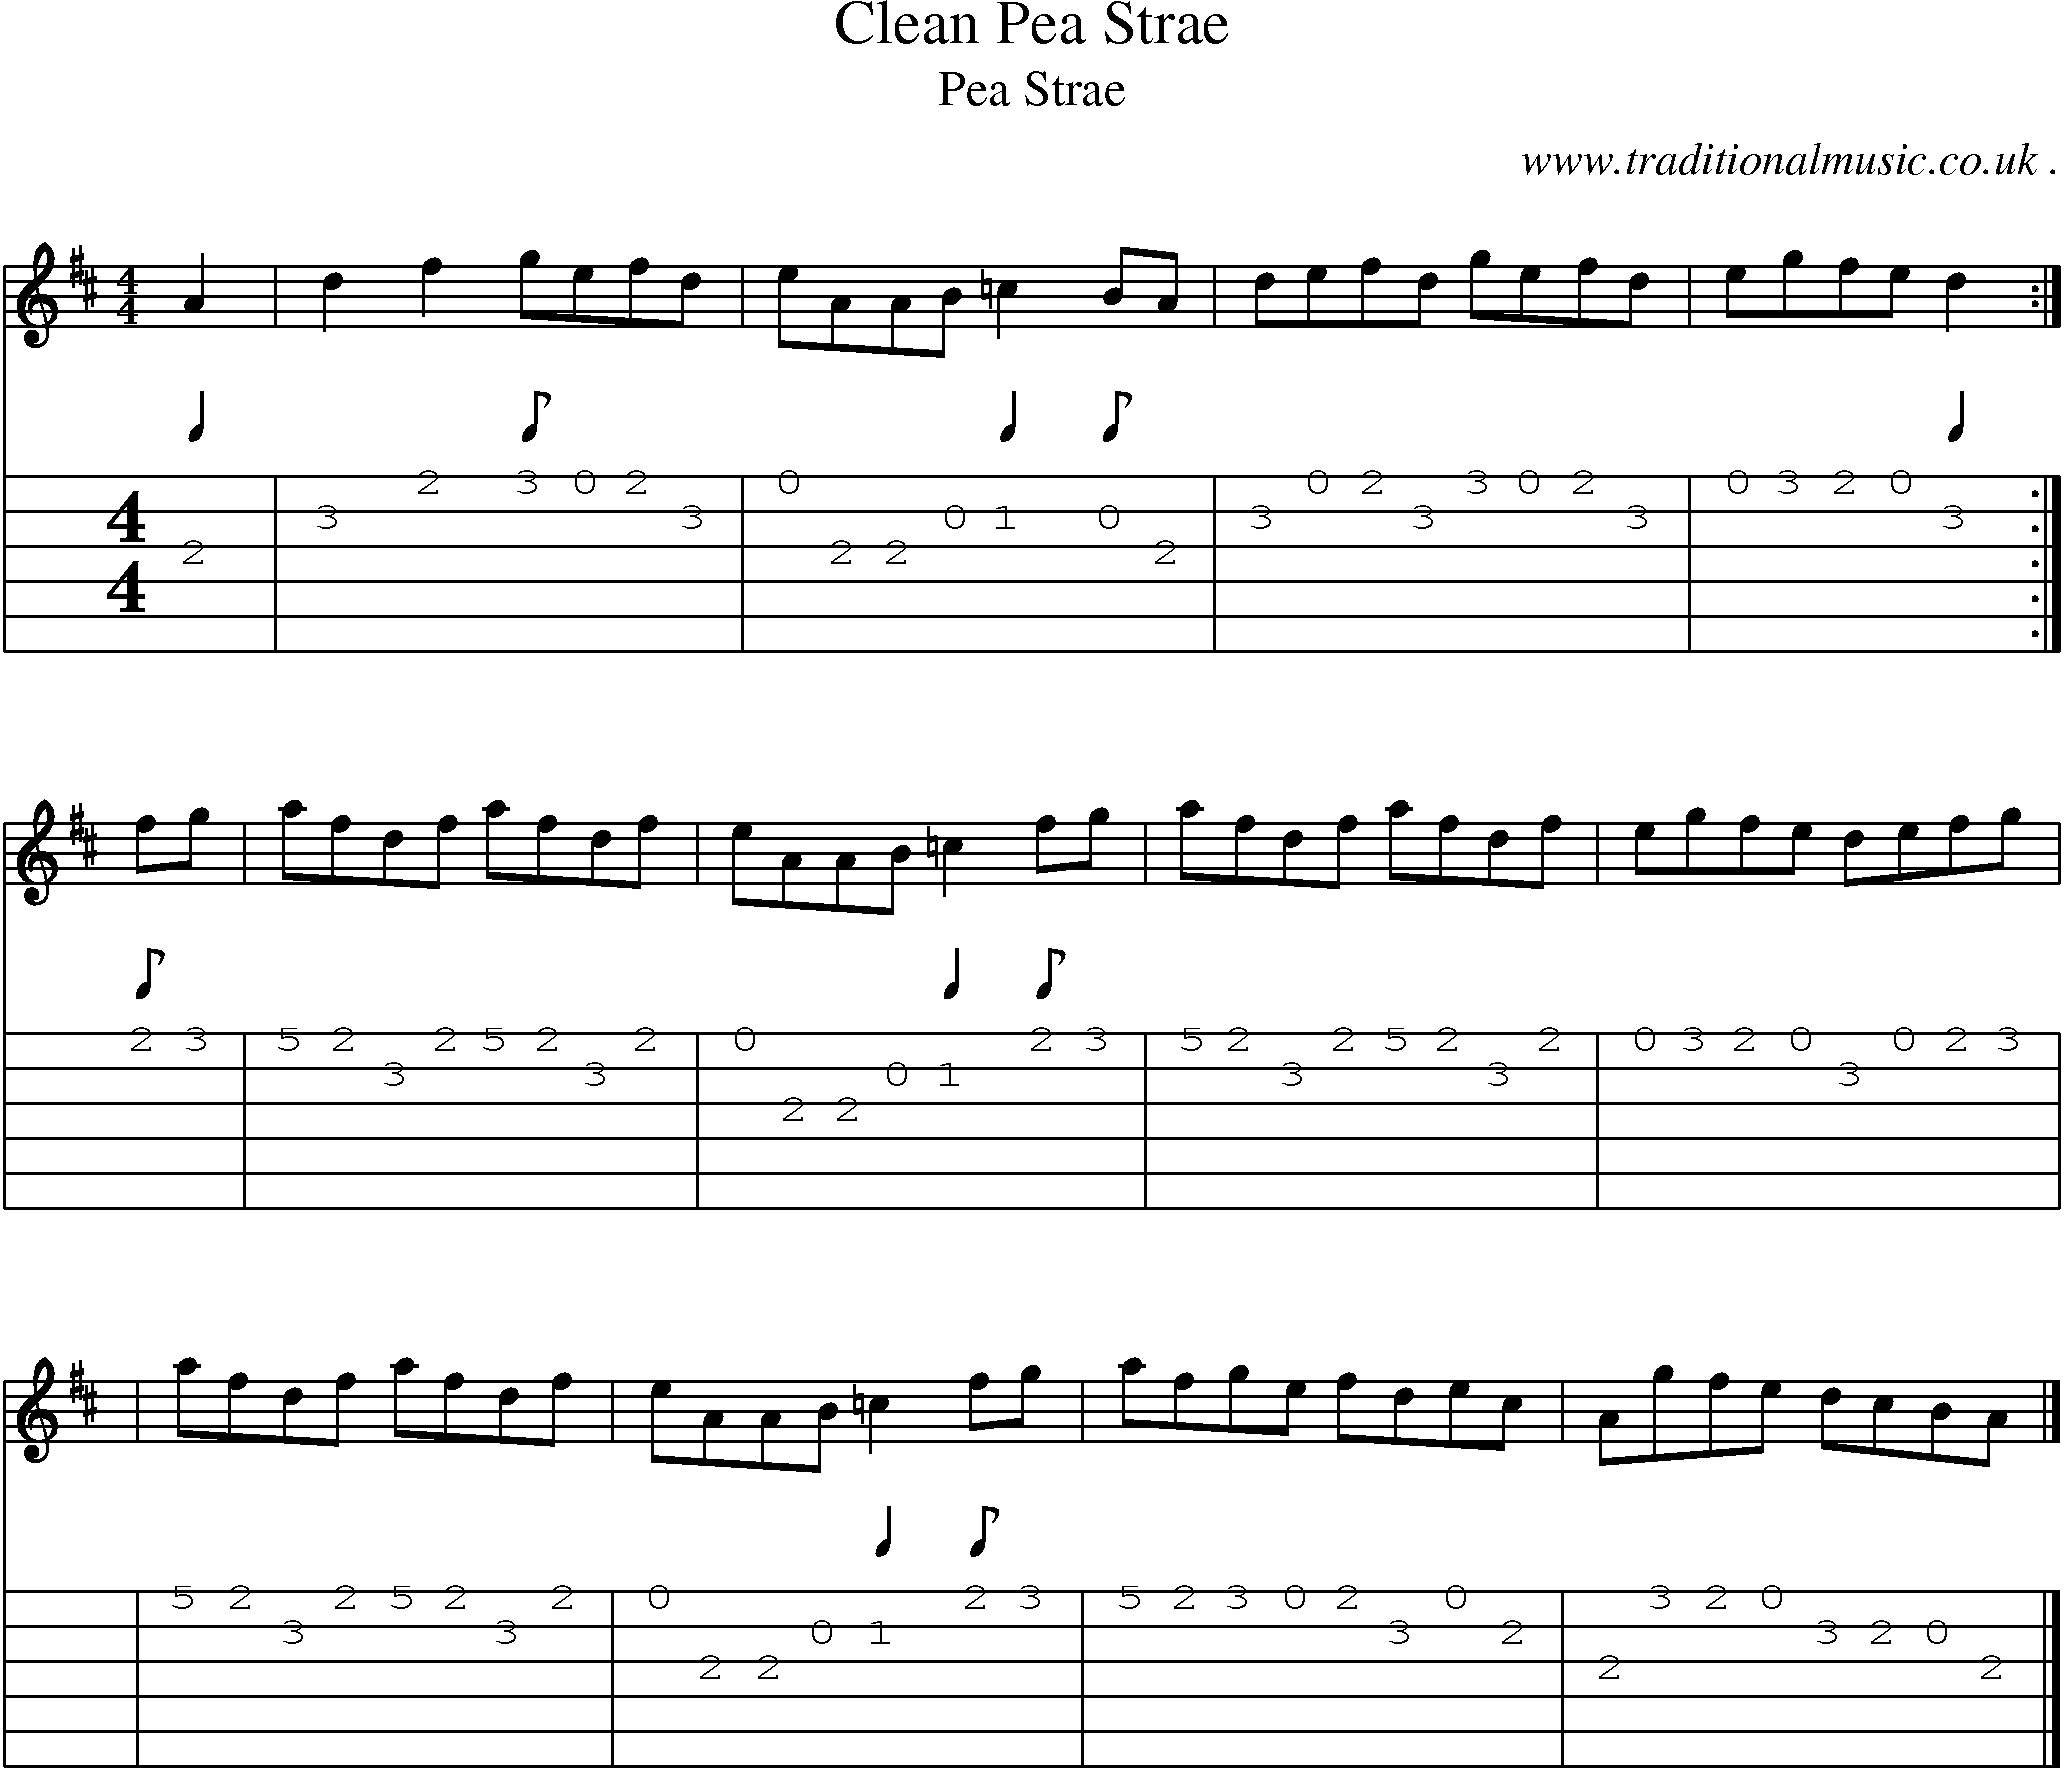 Sheet-music  score, Chords and Guitar Tabs for Clean Pea Strae